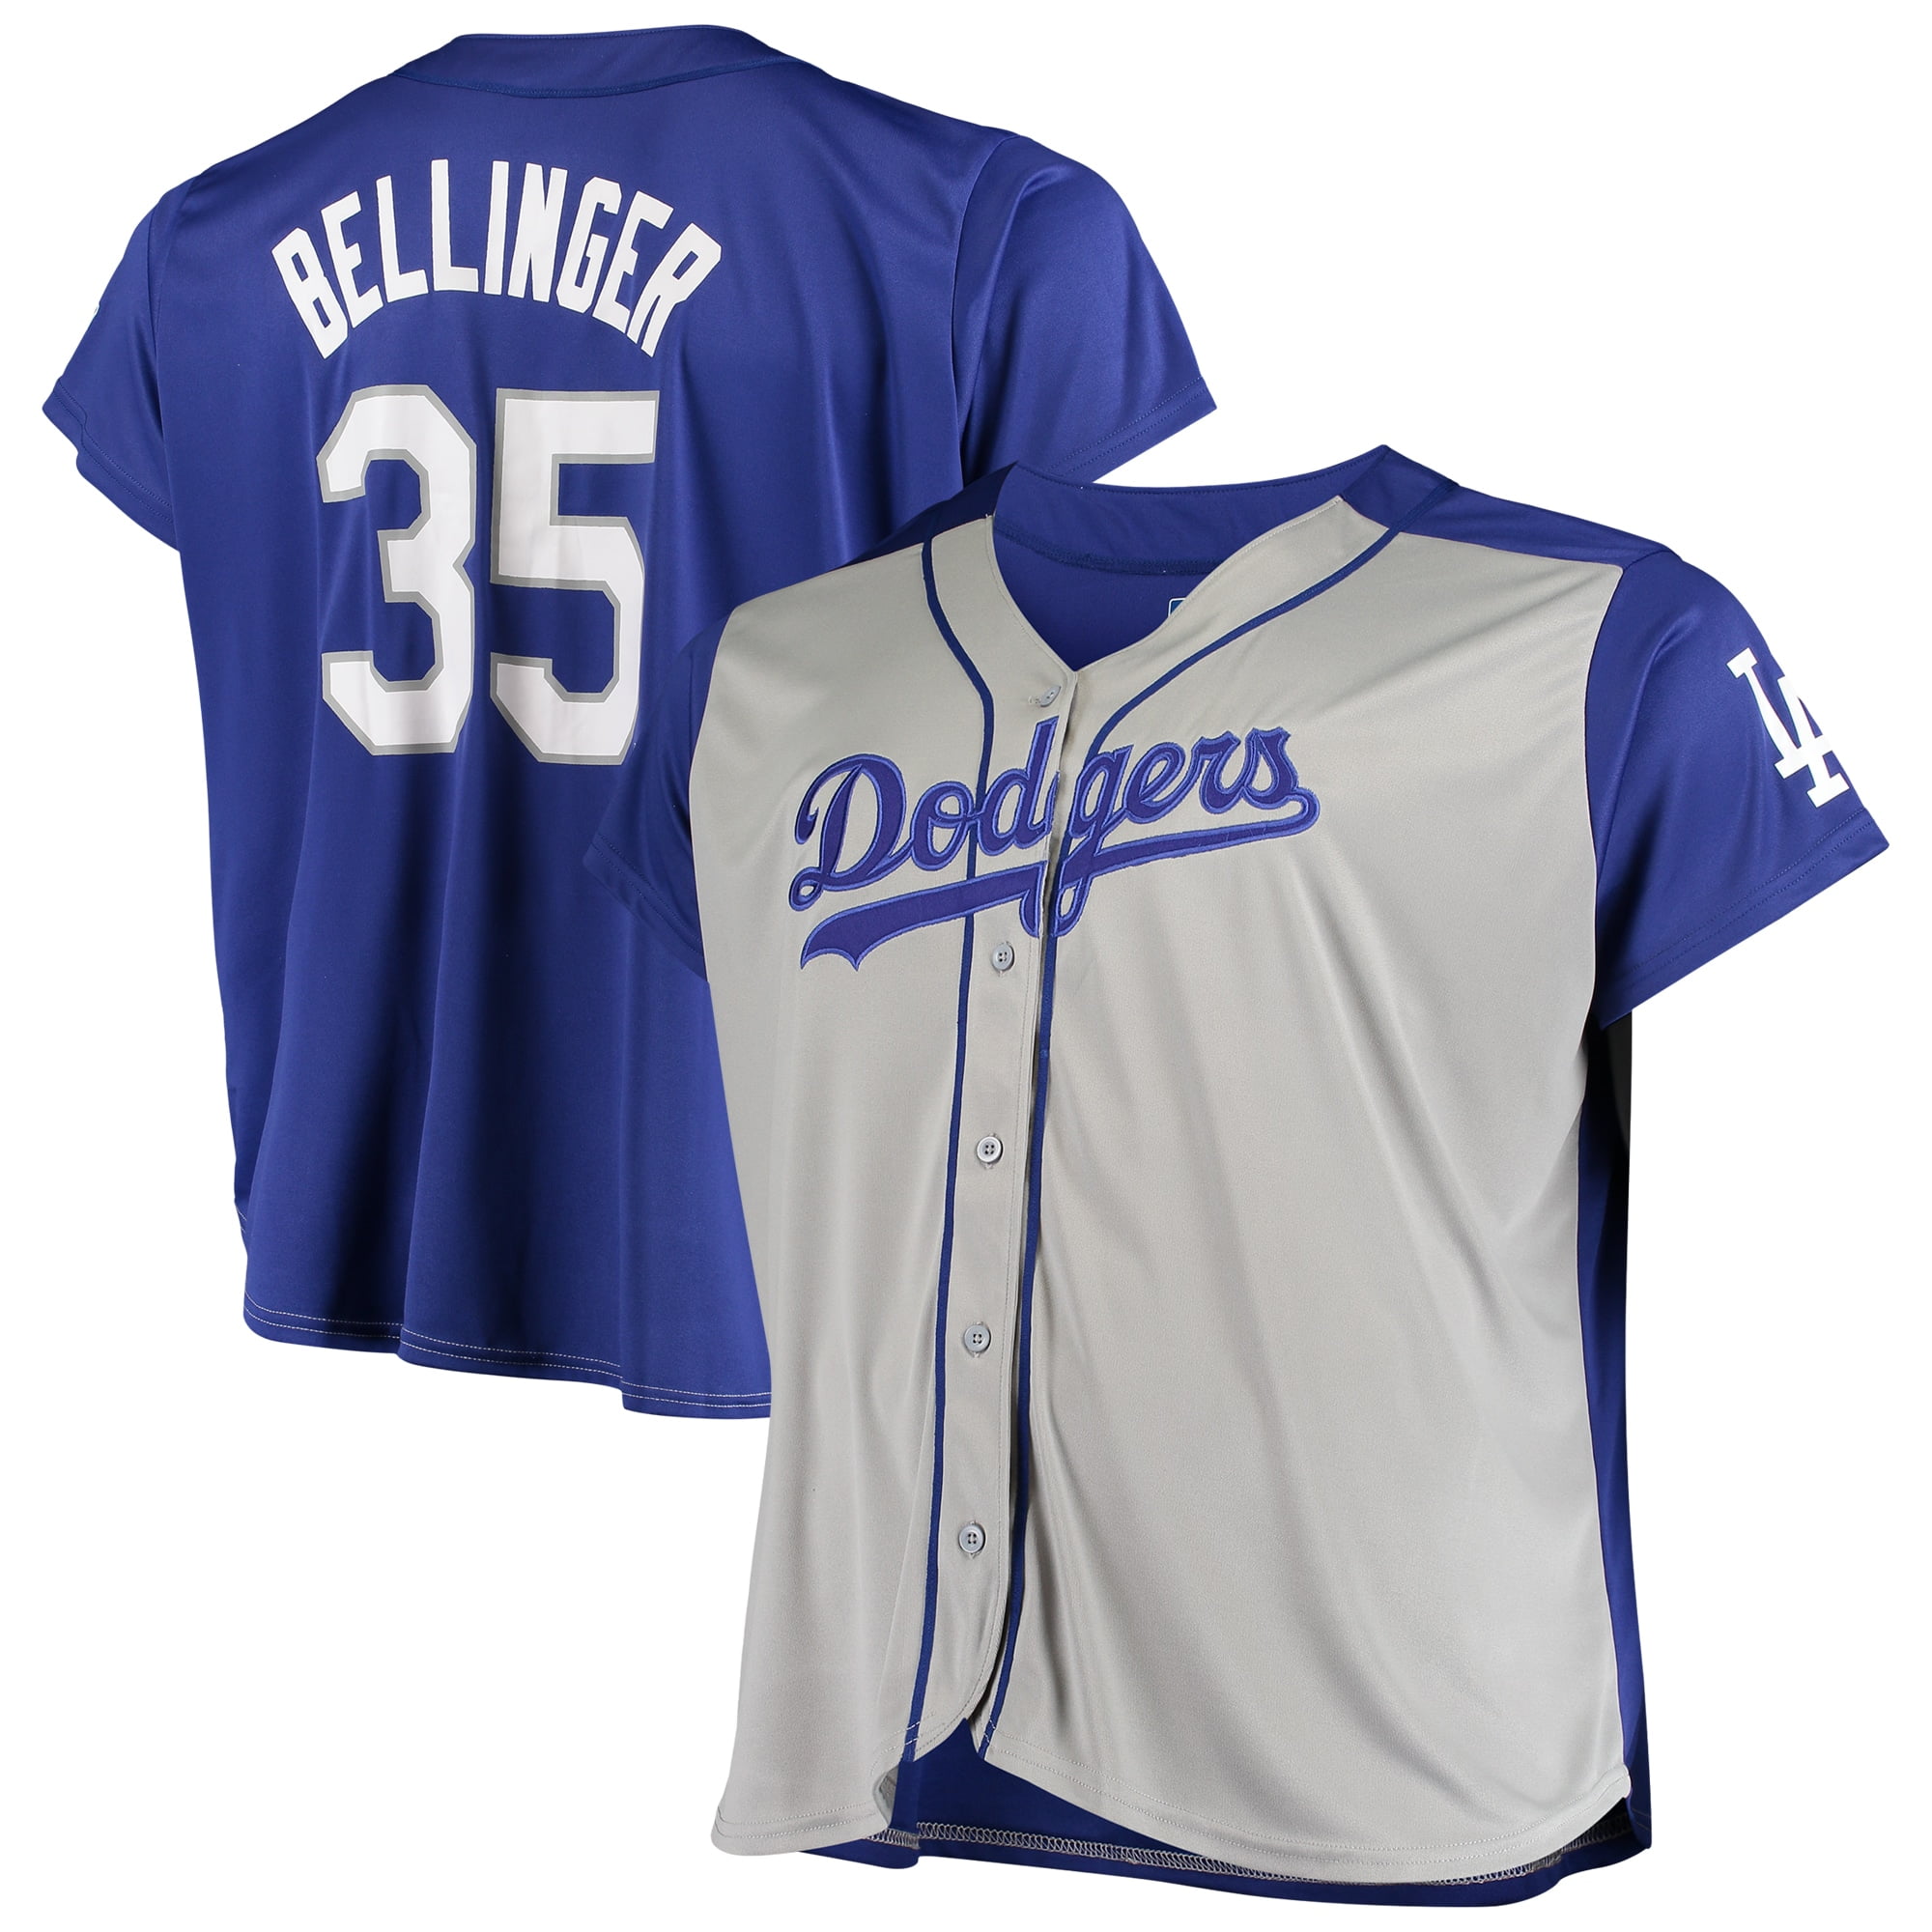 gray dodgers jersey